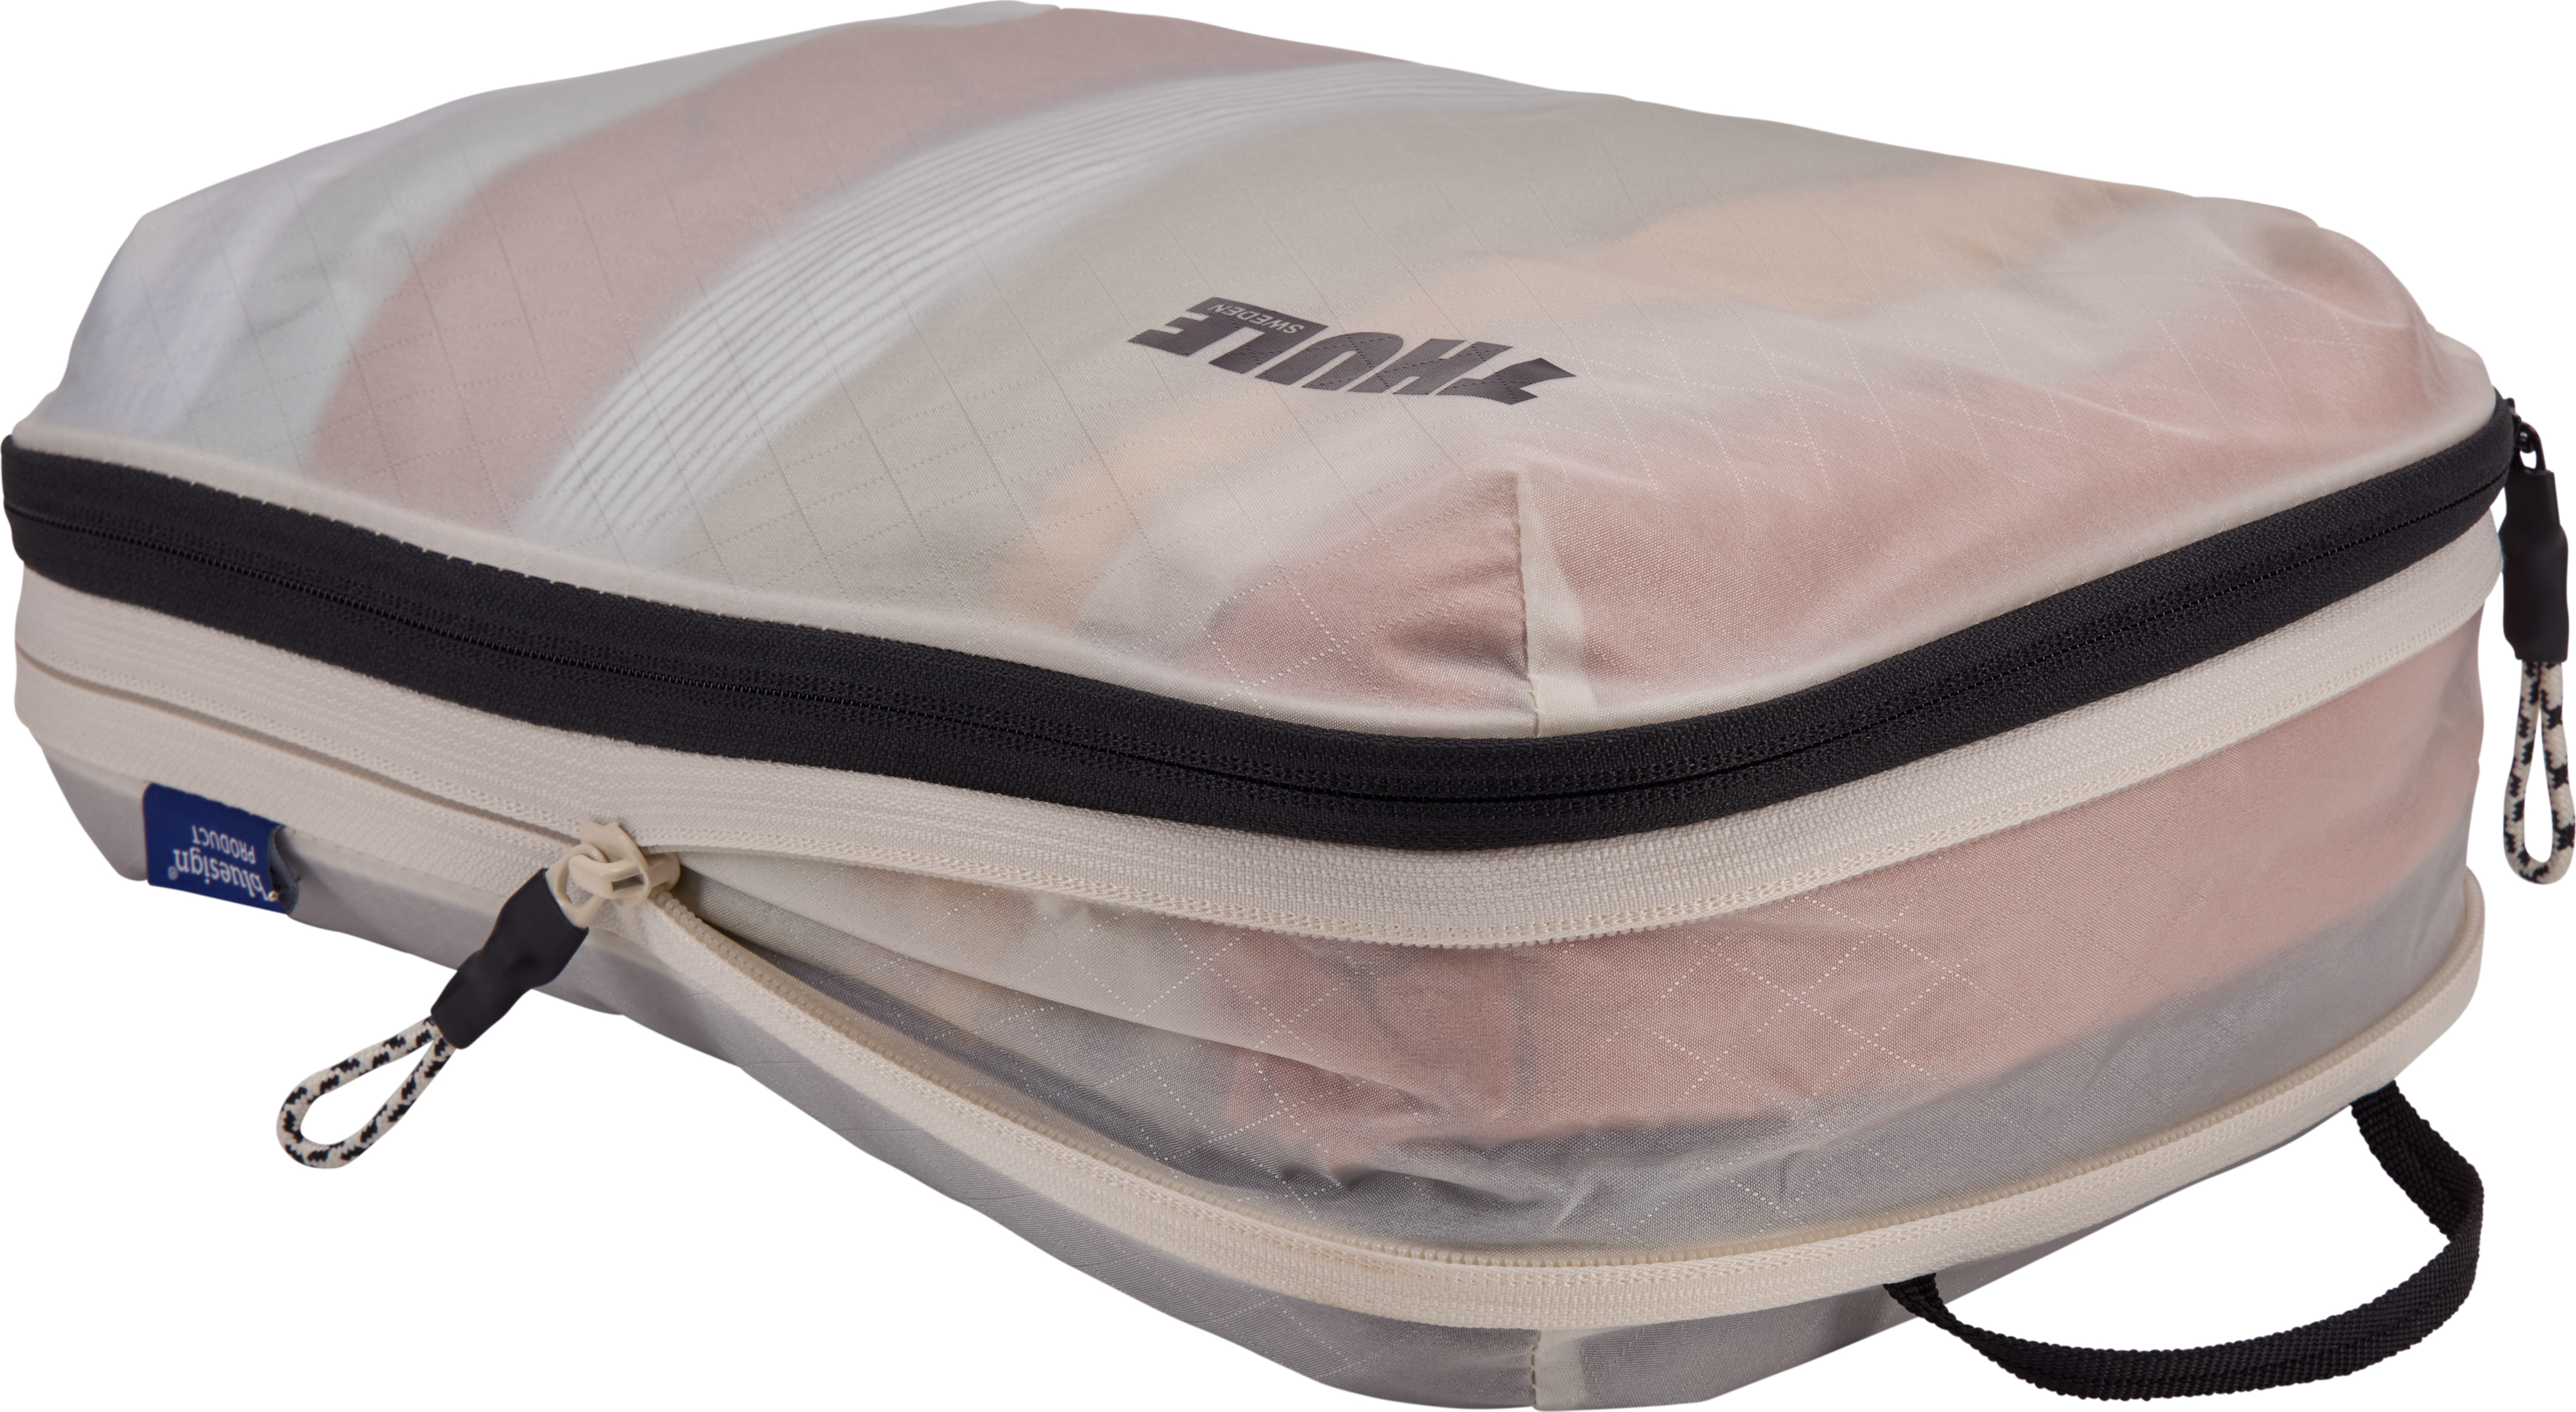 Thule Compression Packing Cube (Small, White) 3204858 B&H Photo